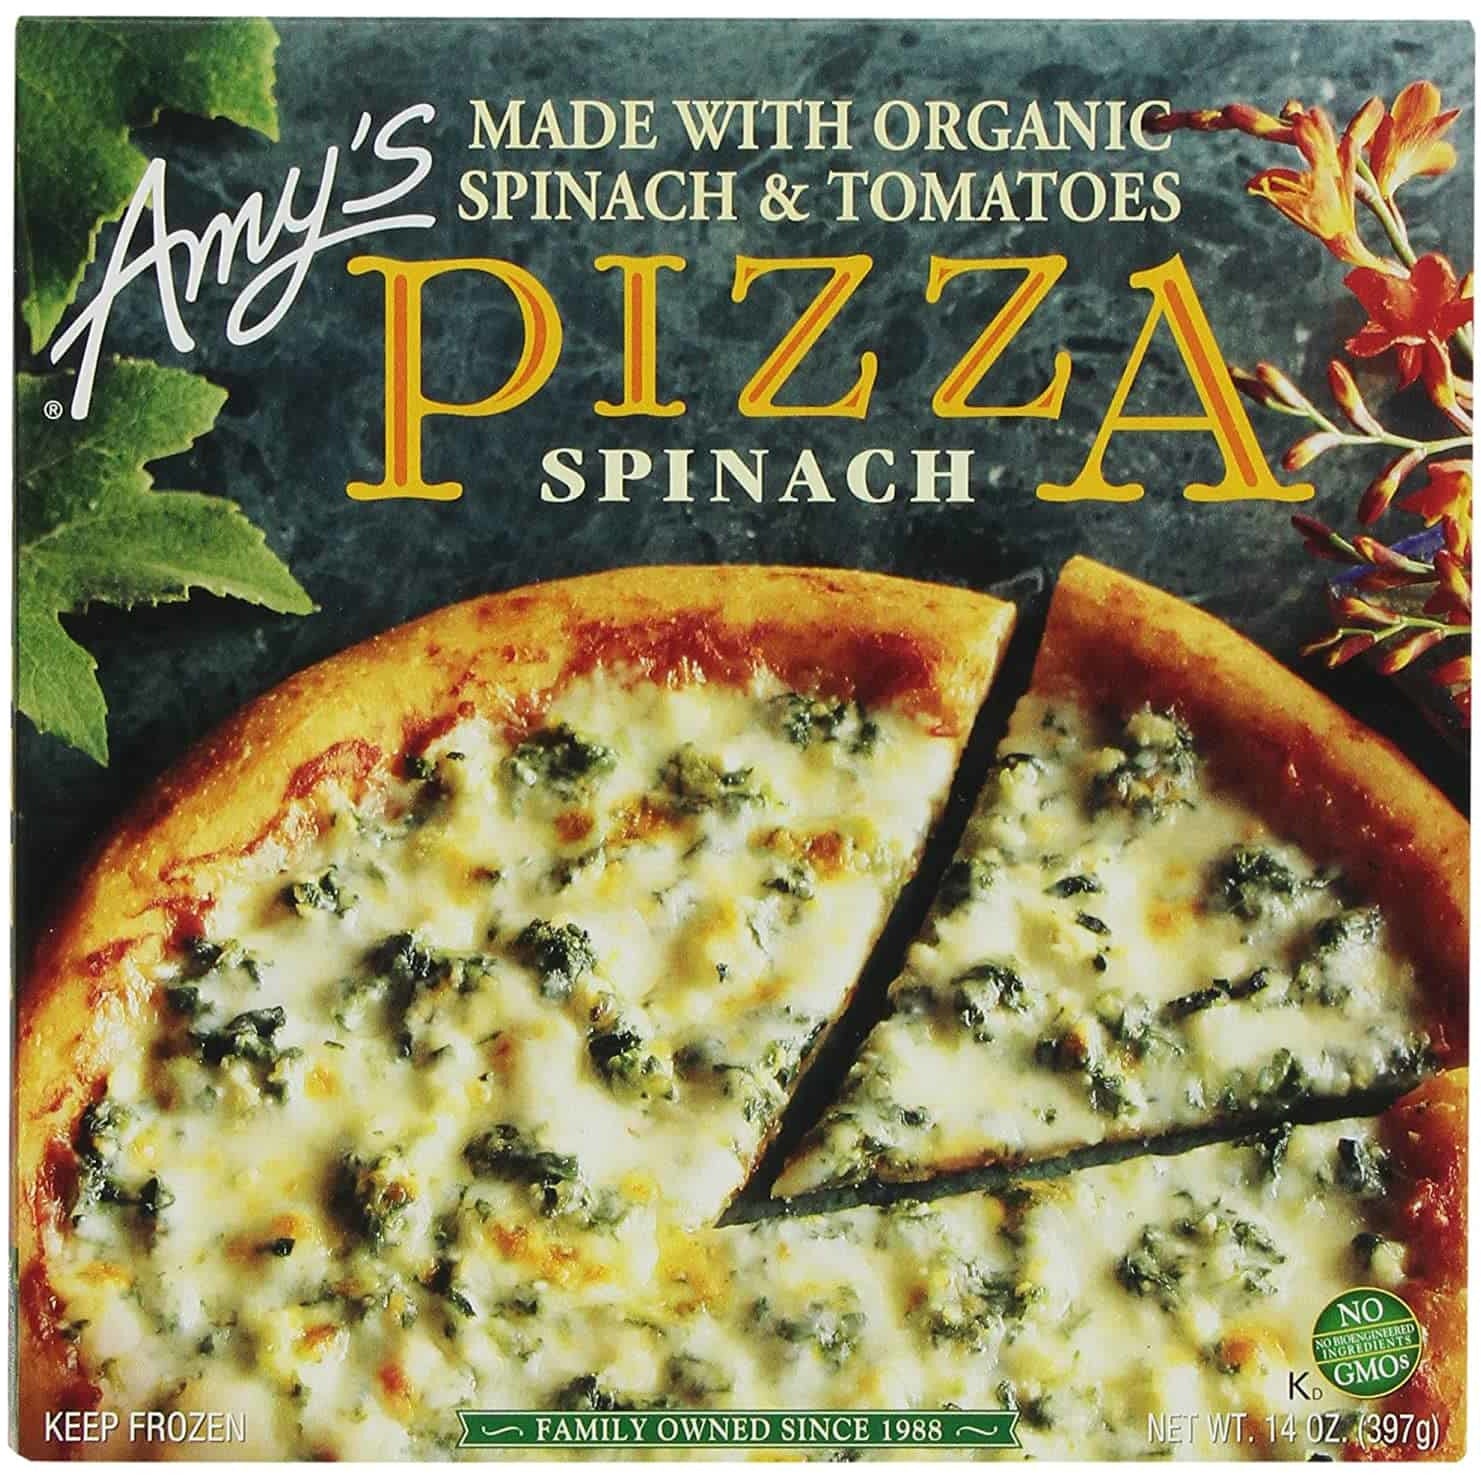 Amy's Frozen Spinach Pizza, Hand-Stretched Crust, 14-Ounce